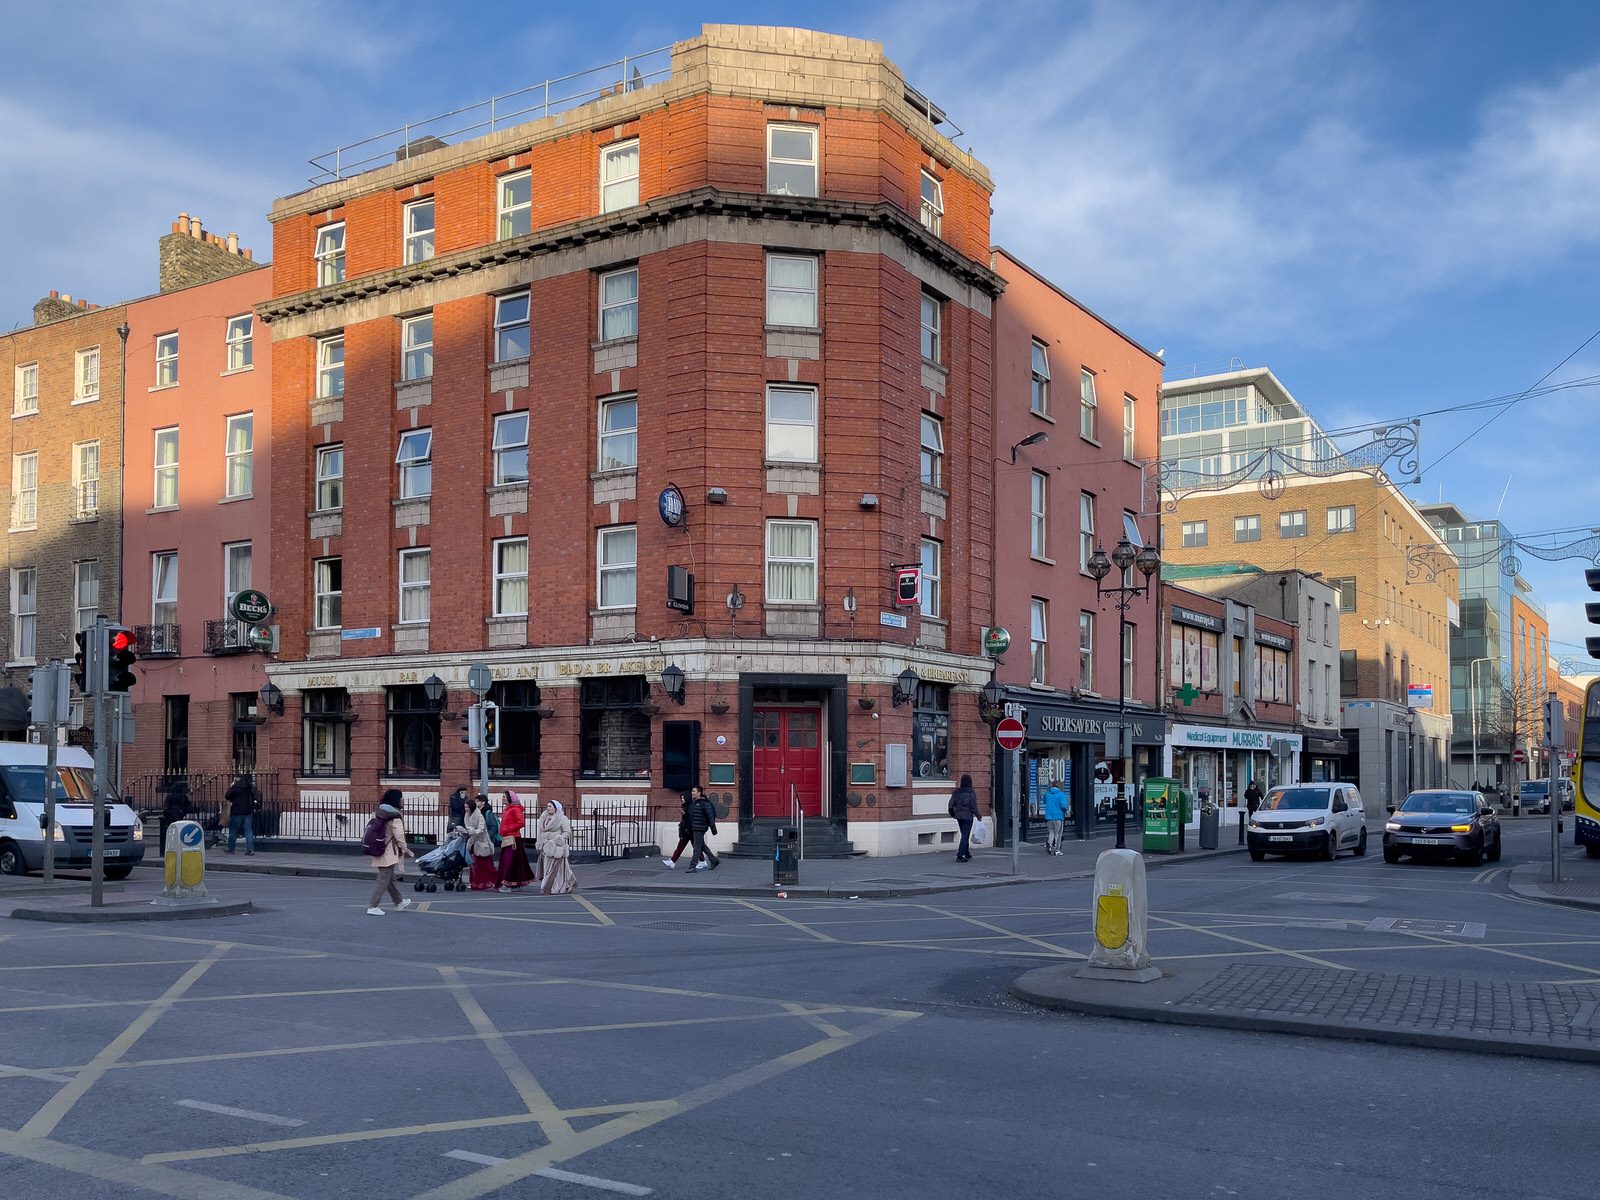 TALBOT STREET [FAILS TO MEET ITS POTENTIAL AS A MAJOR SHOPPING STREET]-225731-1